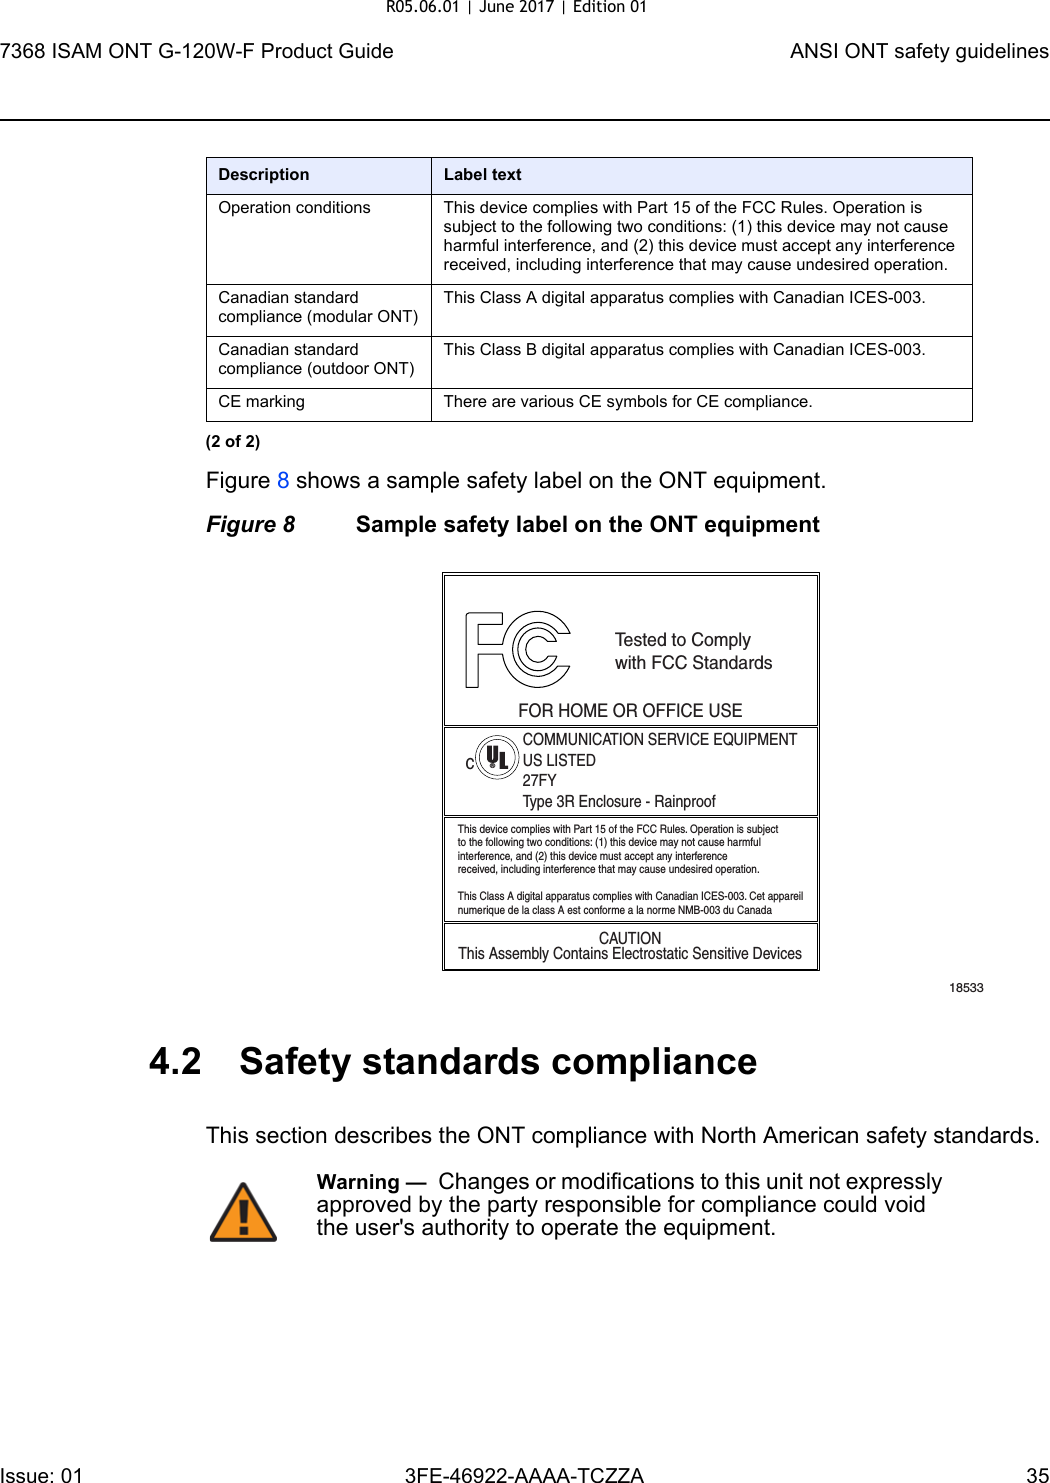 7368 ISAM ONT G-120W-F Product Guide ANSI ONT safety guidelinesIssue: 01 3FE-46922-AAAA-TCZZA 35 Figure 8 shows a sample safety label on the ONT equipment.Figure 8 Sample safety label on the ONT equipment4.2 Safety standards complianceThis section describes the ONT compliance with North American safety standards.Operation conditions This device complies with Part 15 of the FCC Rules. Operation is subject to the following two conditions: (1) this device may not cause harmful interference, and (2) this device must accept any interference received, including interference that may cause undesired operation.Canadian standard compliance (modular ONT)This Class A digital apparatus complies with Canadian ICES-003. Canadian standard compliance (outdoor ONT)This Class B digital apparatus complies with Canadian ICES-003. CE marking There are various CE symbols for CE compliance.Description Label text(2 of 2)18533This device complies with Part 15 of the FCC Rules. Operation is subjectto the following two conditions: (1) this device may not cause harmfulinterference, and (2) this device must accept any interferencereceived, including interference that may cause undesired operation.This Class A digital apparatus complies with Canadian ICES-003. Cet appareilnumerique de la class A est conforme a la norme NMB-003 du CanadaTested to Complywith FCC StandardsFOR HOME OR OFFICE USECOMMUNICATION SERVICE EQUIPMENTUS LISTED27FYType 3R Enclosure - RainproofCAUTIONThis Assembly Contains Electrostatic Sensitive Devicesc®Warning —  Changes or modifications to this unit not expressly approved by the party responsible for compliance could void the user&apos;s authority to operate the equipment.R05.06.01 | June 2017 | Edition 01 